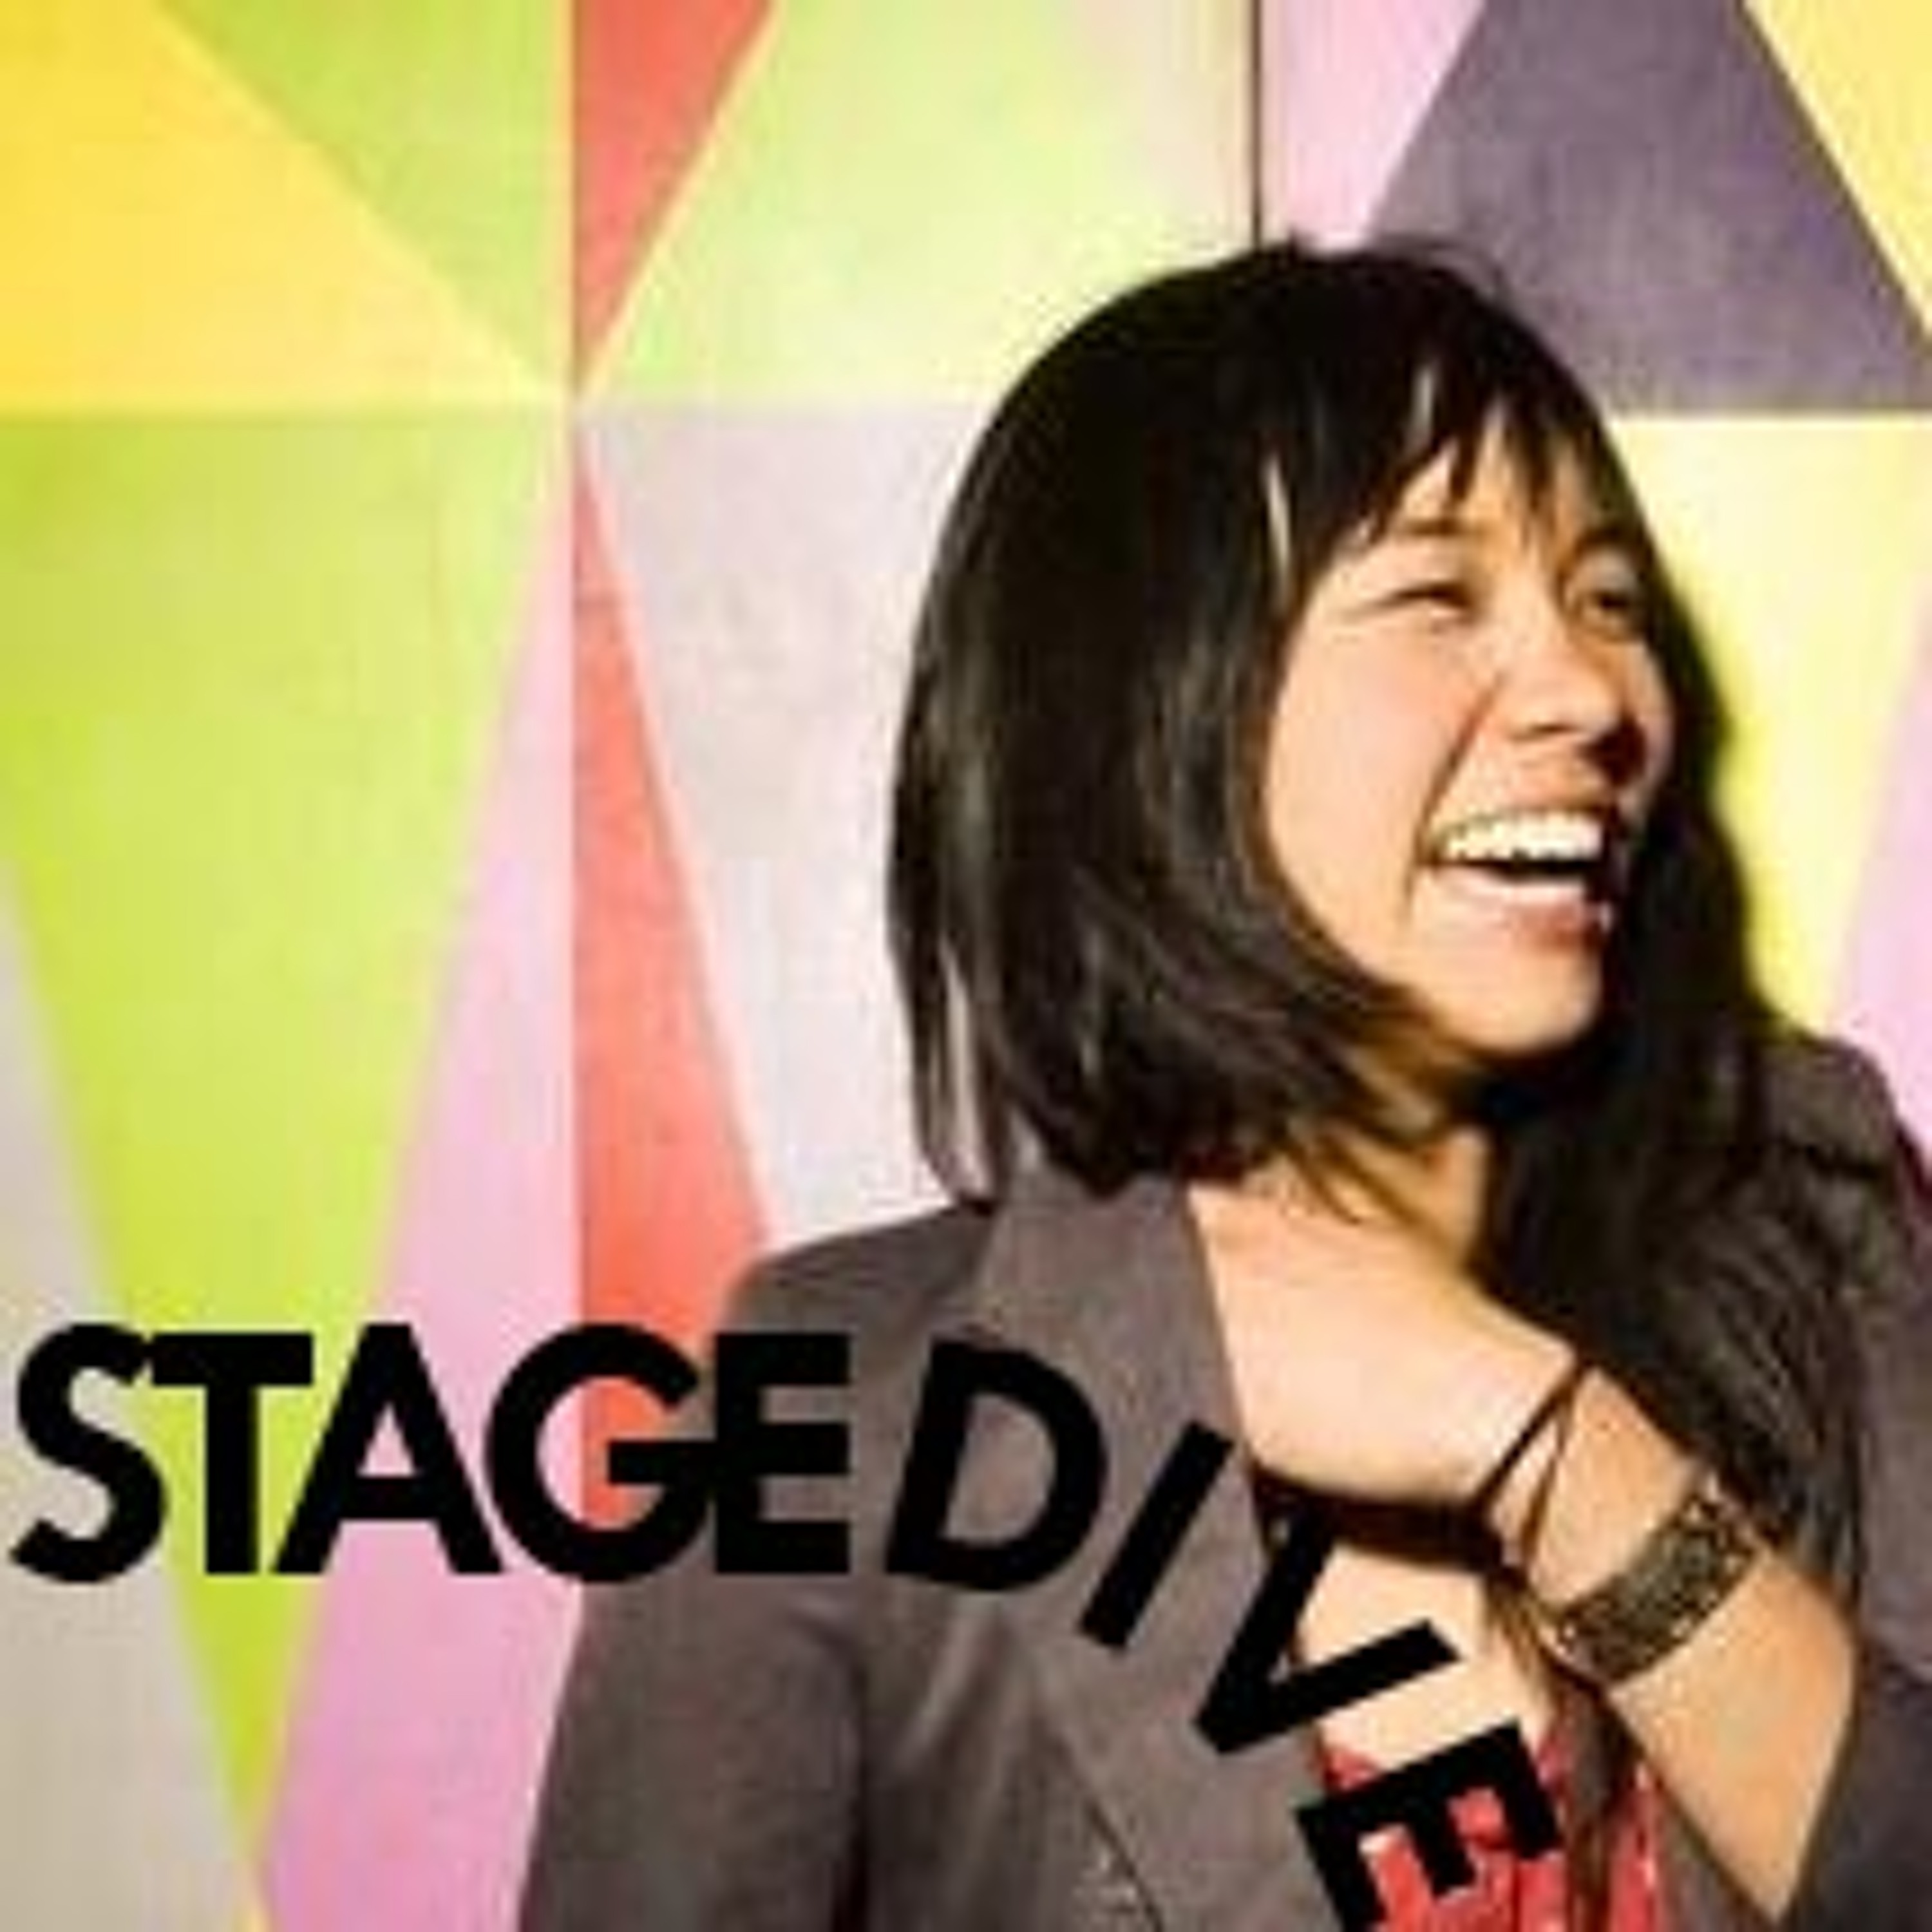 Stagedive -4- Thao Nguyen